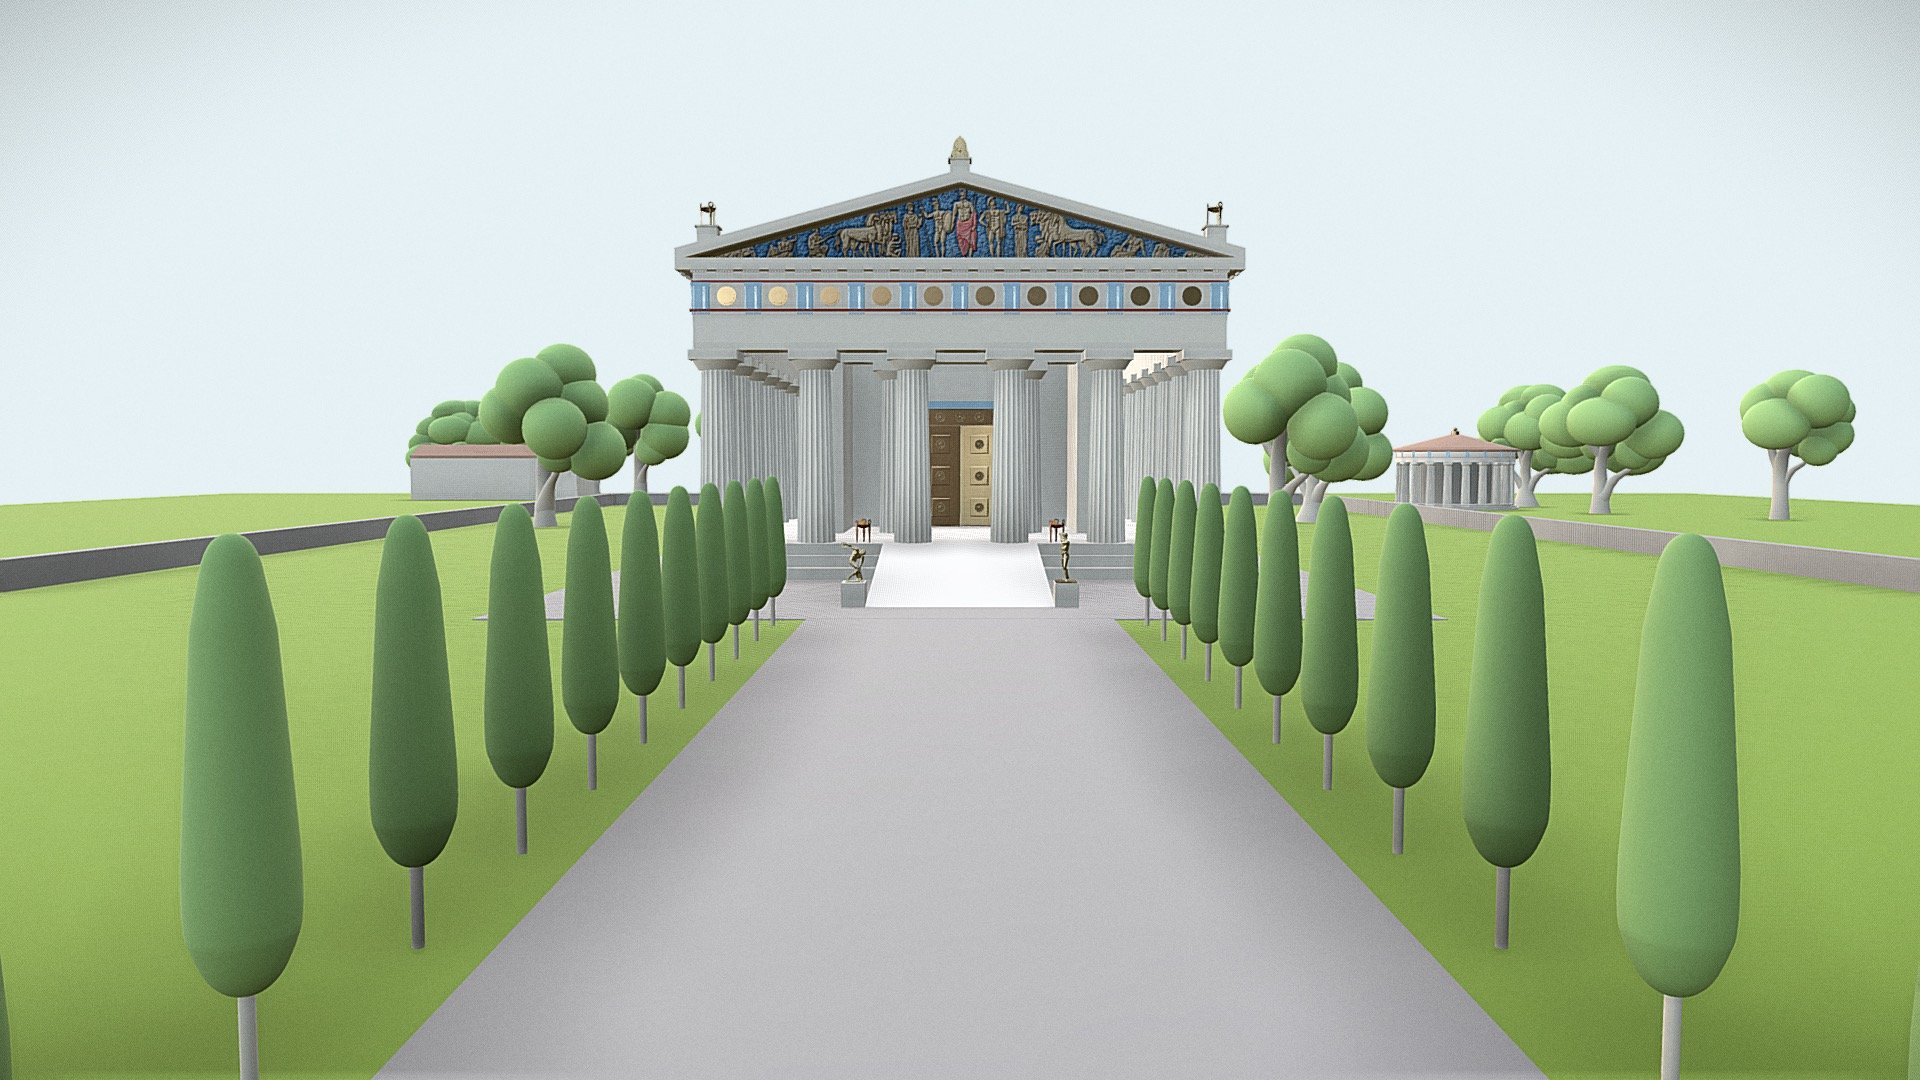 3D MODEL

Tools: Cinema 4D, Adobe Illustrator and Photoshop. The statues flanking the entrance ramp (Discobolus and Artemision Bronze) are courtesy of MyMiniFactory.com. This is a work in progress that I may update from time to time.

CULTURAL ARTIFACT

&ldquo;The Temple of Zeus at Olympia was an ancient Greek temple in Olympia, Greece, dedicated to the god Zeus. . . . Construction of the temple began around 470 BC and was probably completed by 457 BC. The architect was Libon of Elis, who worked in the Doric style. . . . The temple housed the renowned statue of Zeus, which was one of the Seven Wonders of the Ancient World. . . . In AD 426, Theodosius II ordered the destruction of the sanctuary. Earthquakes in 522 and 551 devastated the ruins and left the Temple of Zeus partially buried.